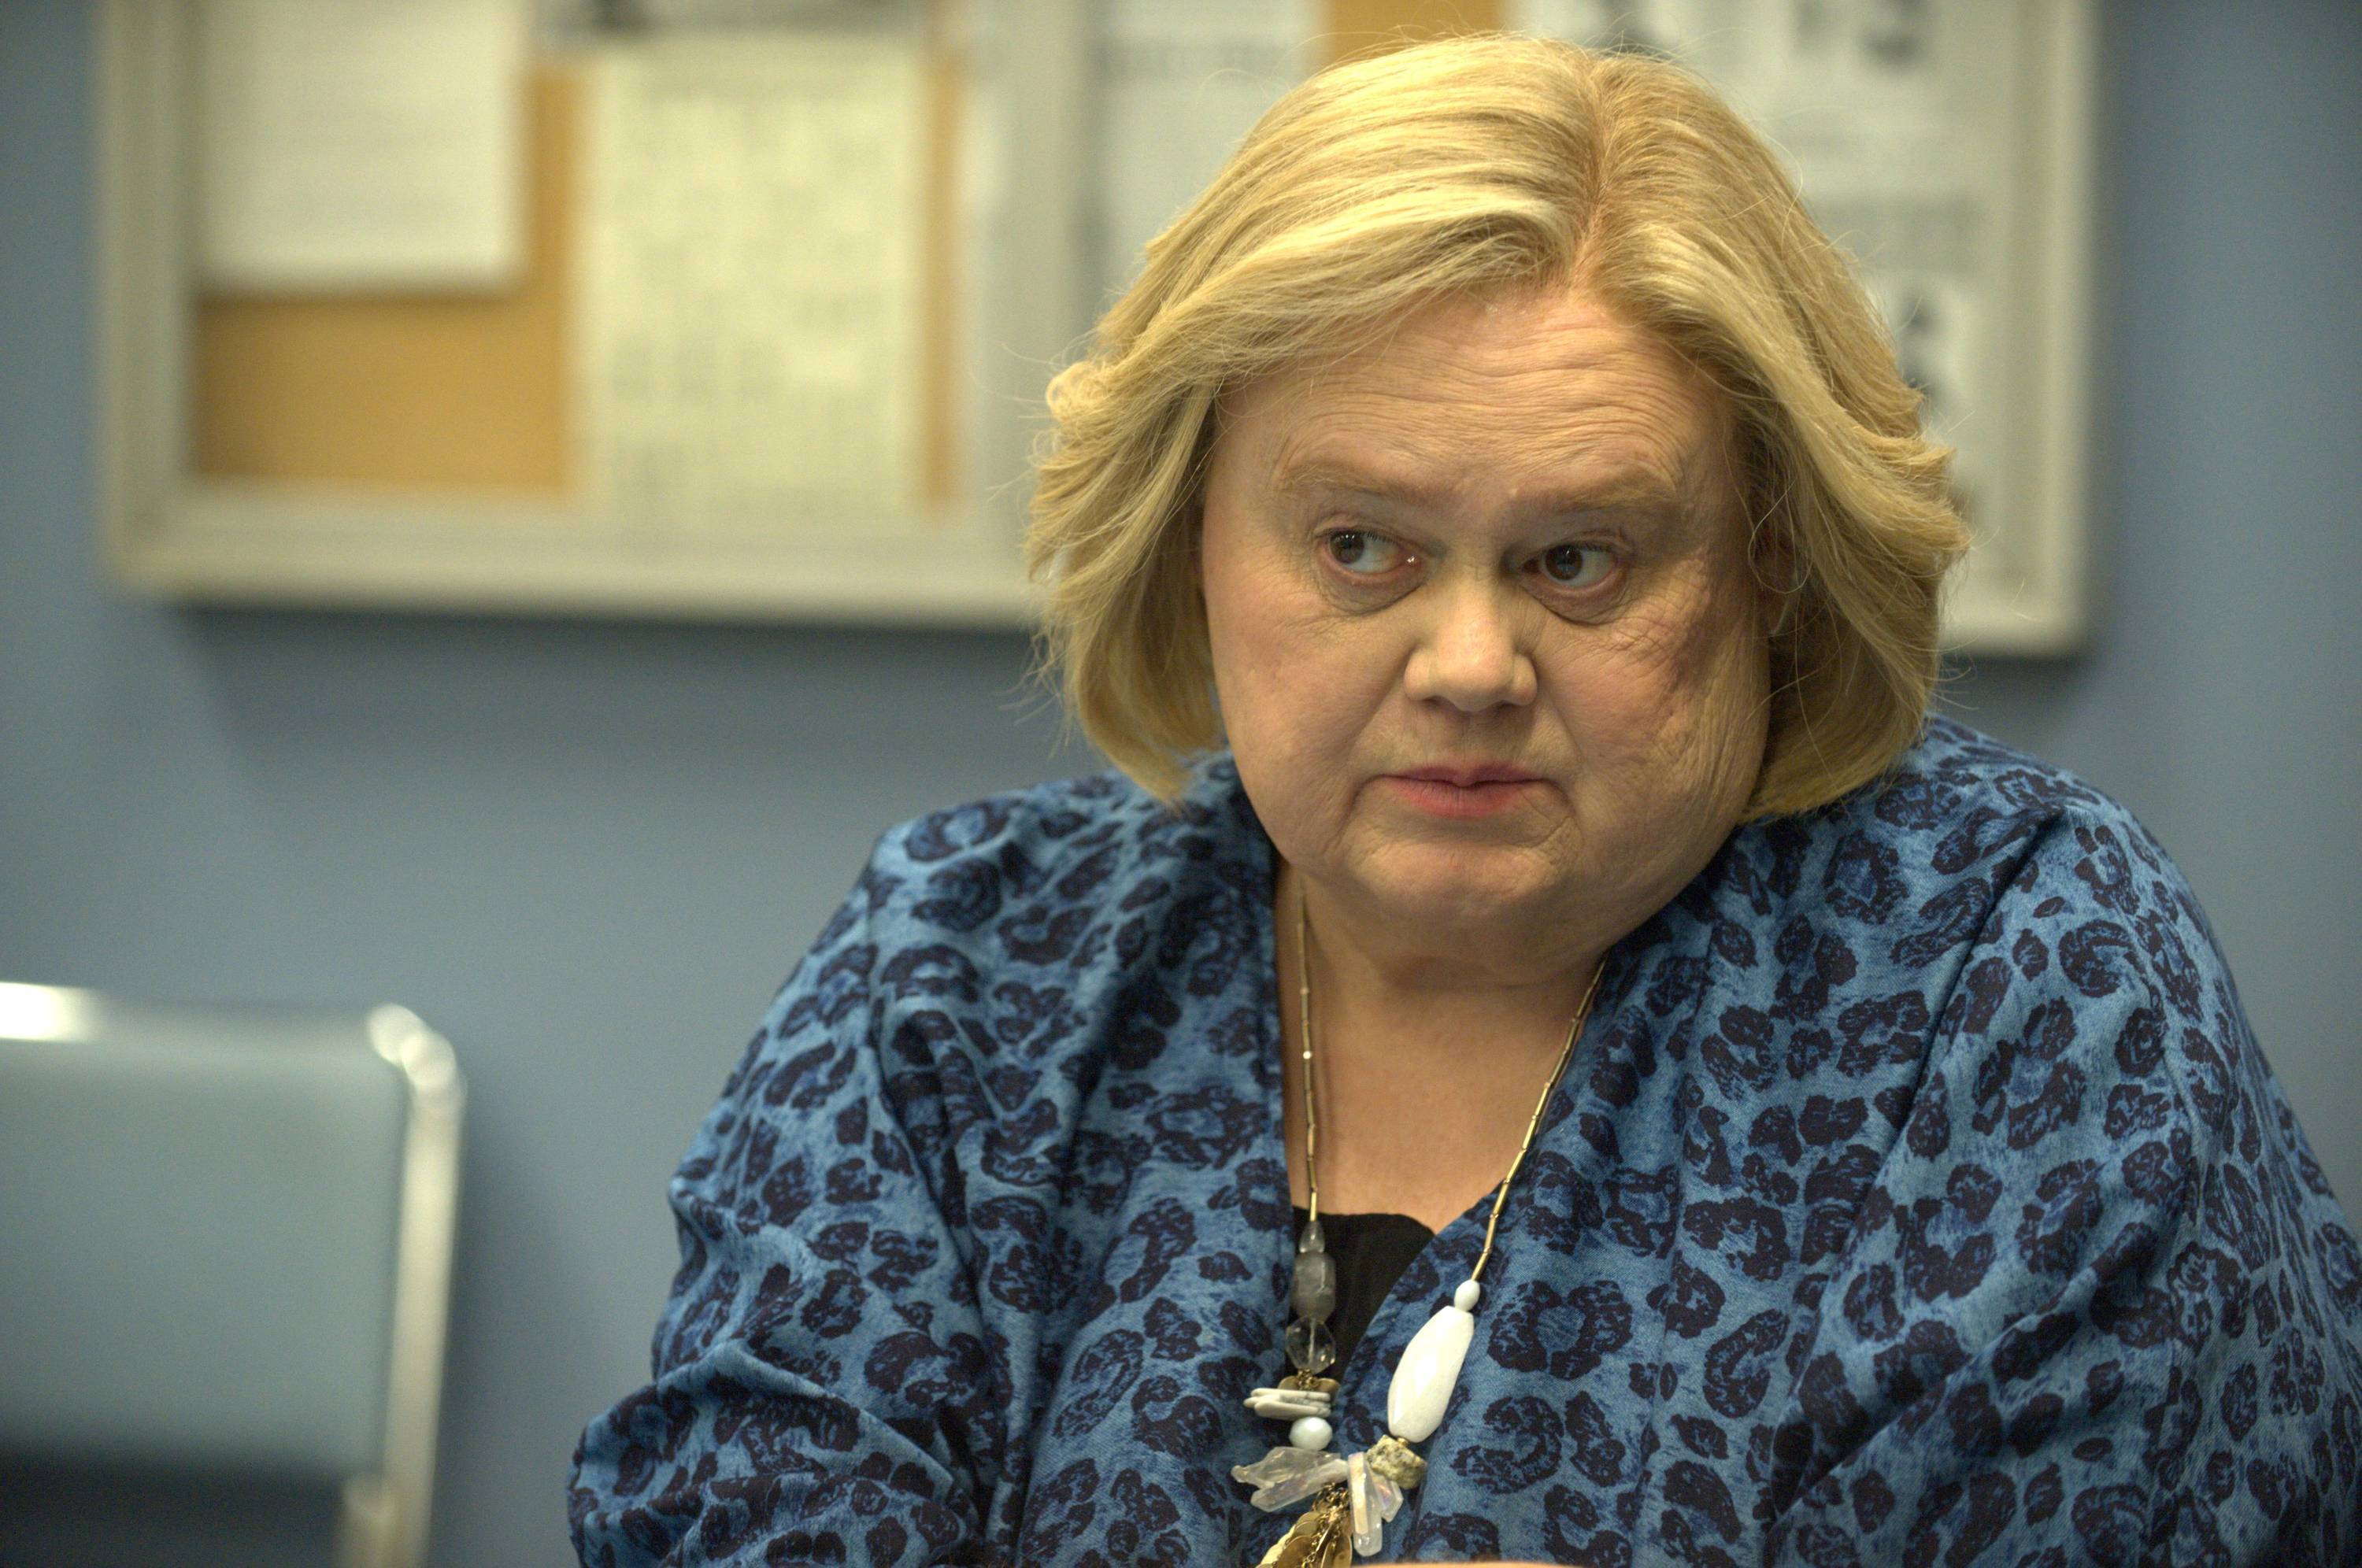 Baskets star Louie Anderson talks channelling his mom